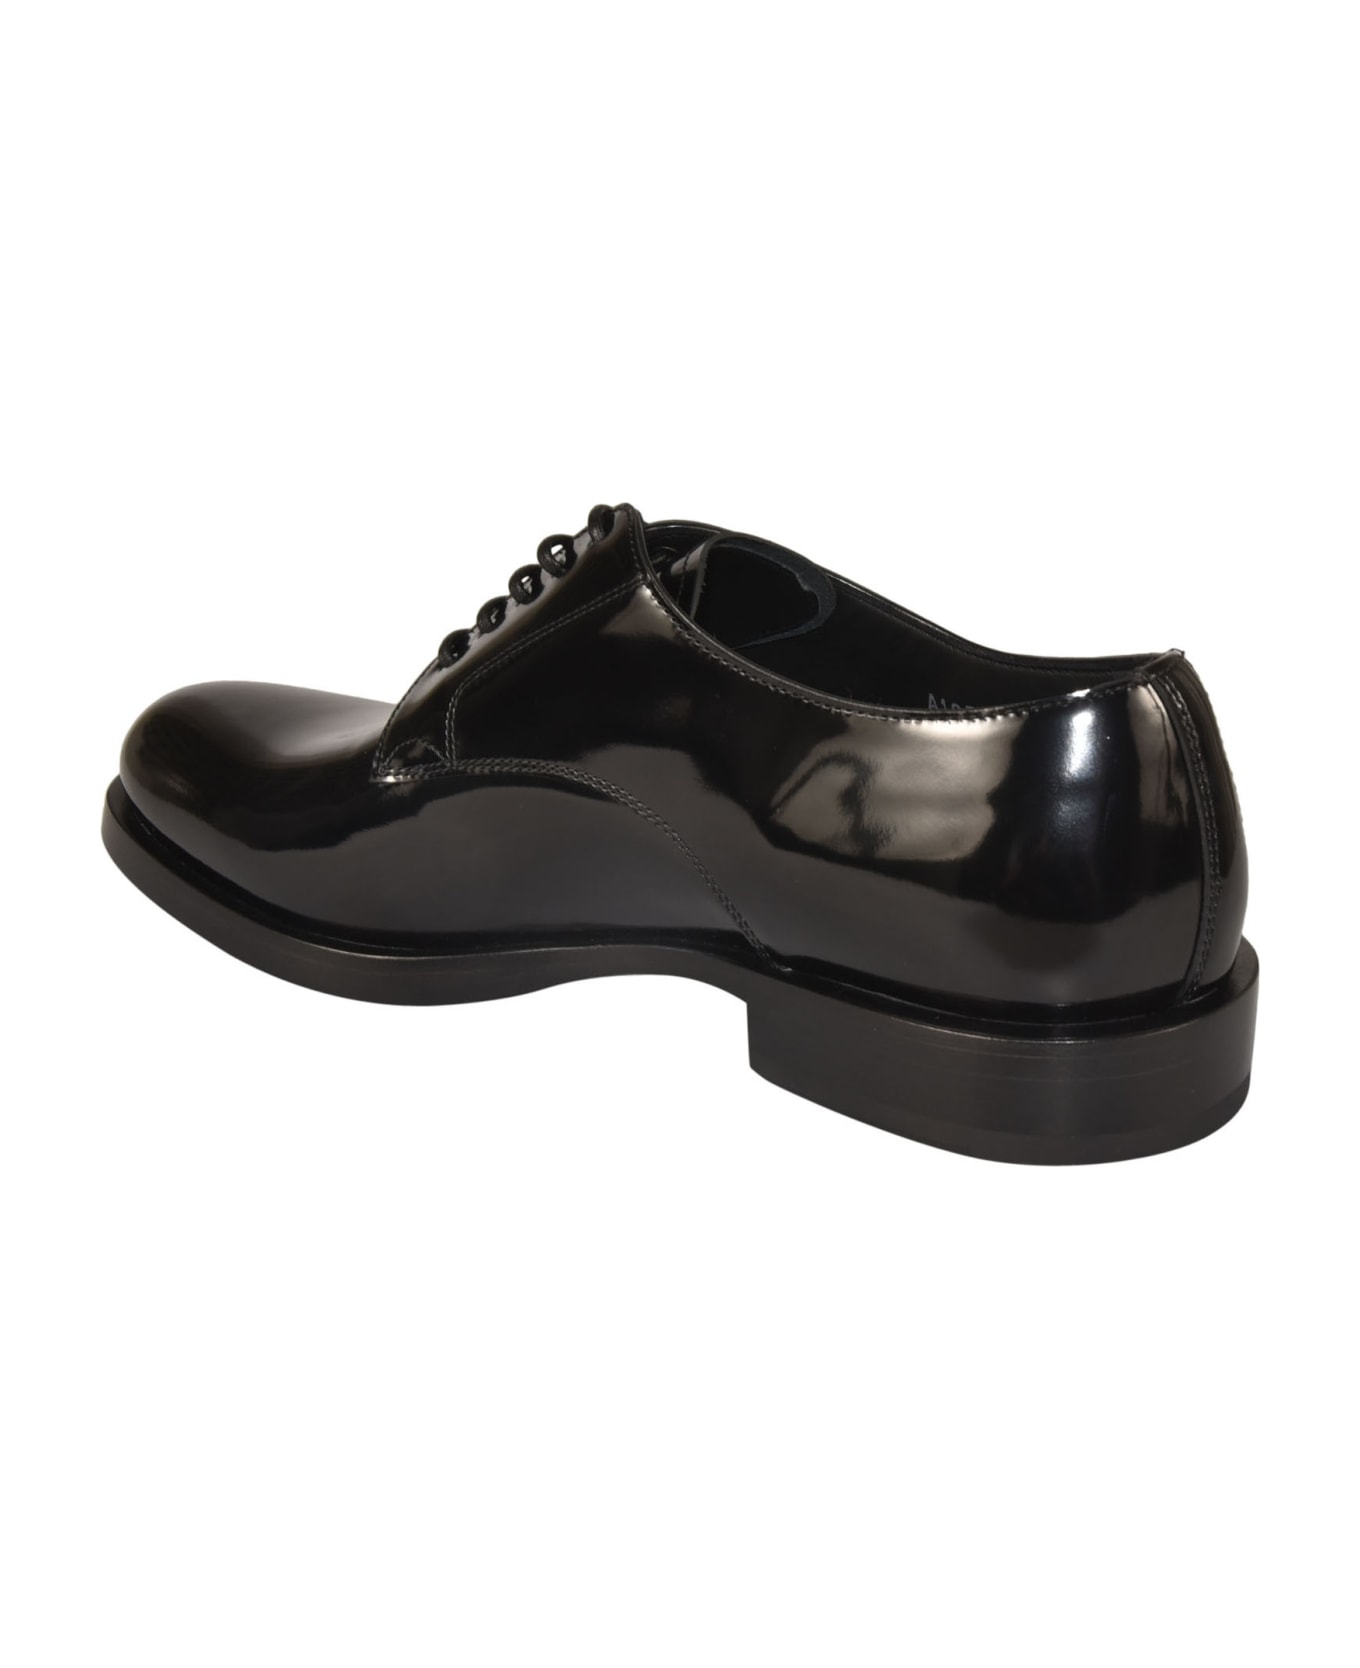 Dolce & Gabbana Classic Lace-up Derby Shoes - Black